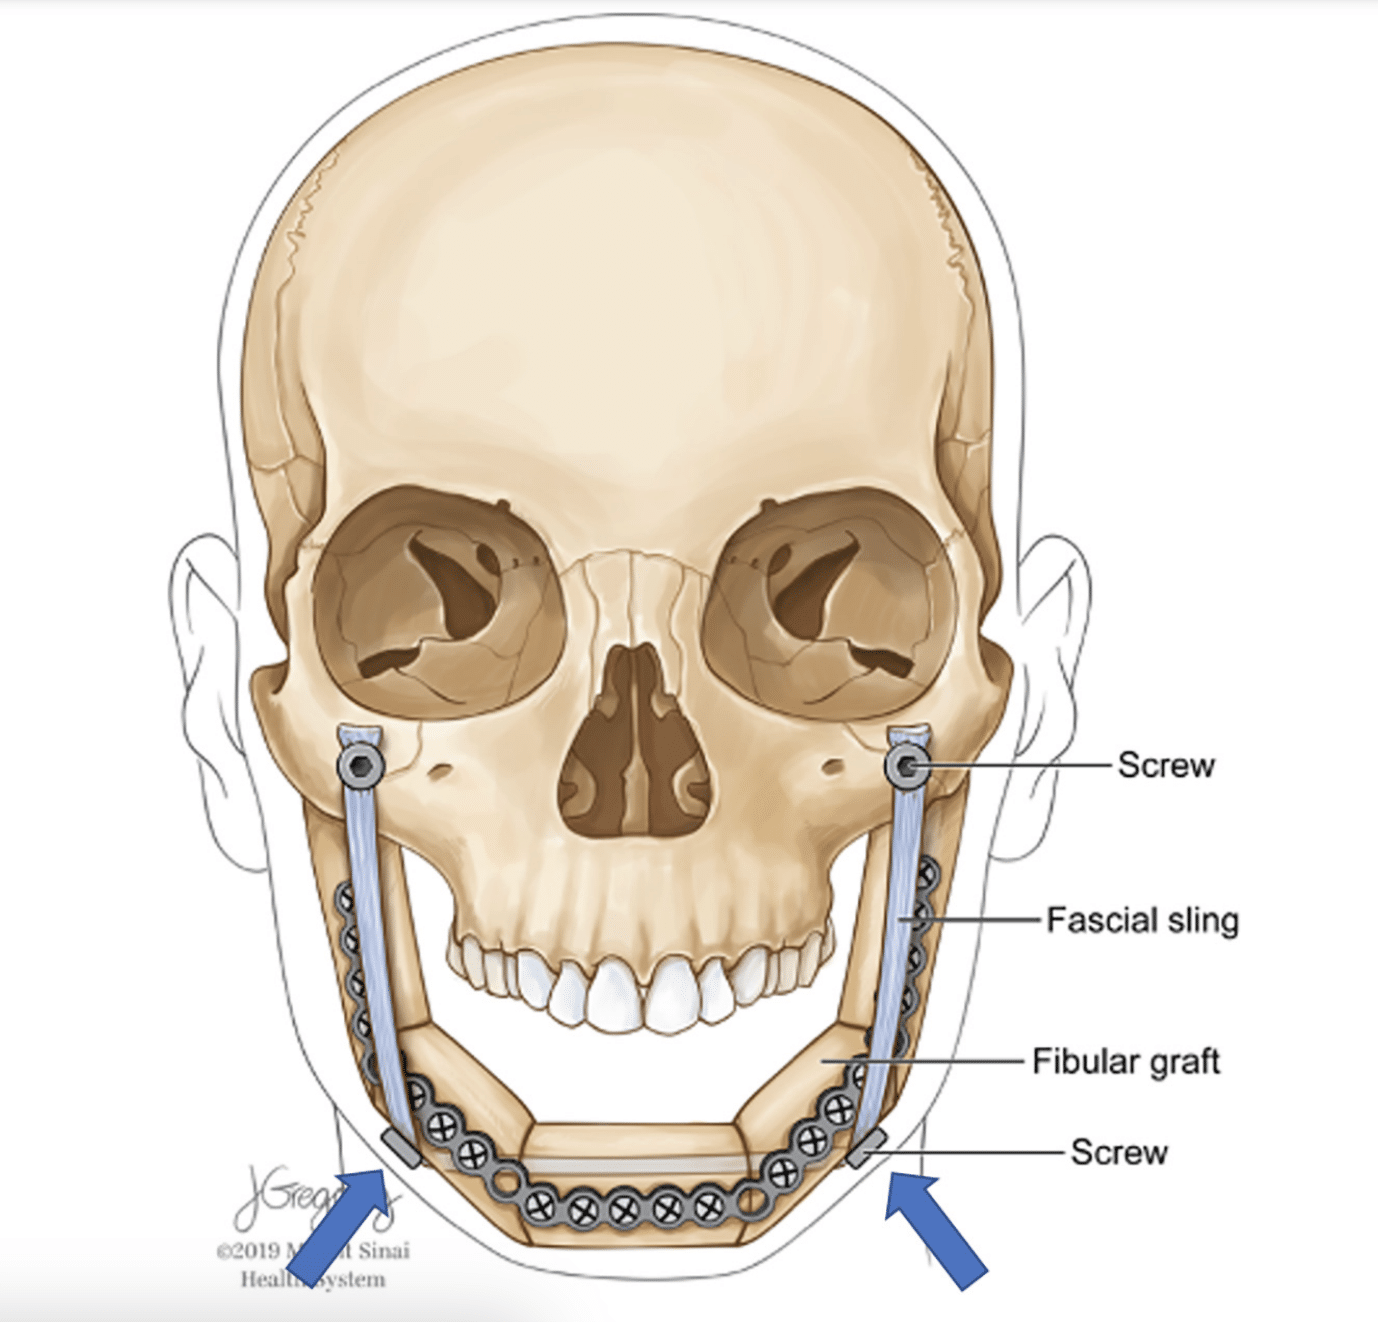 A novel technique to prevent or correct open-mouth deformity after